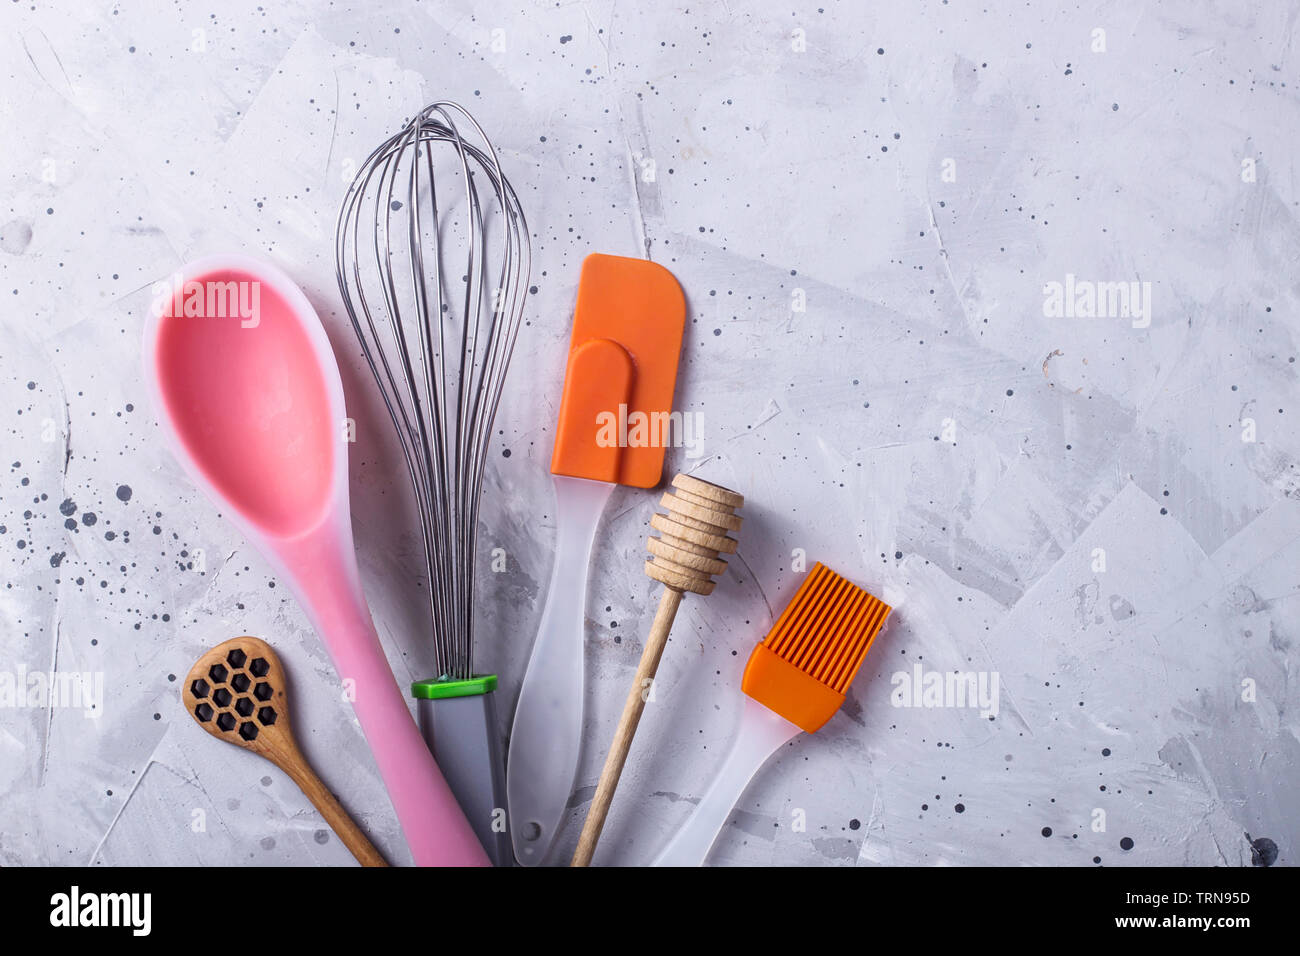 Tools for making desserts - spoon, whisk, spatula for dough, honey, creams on a gray table Stock Photo